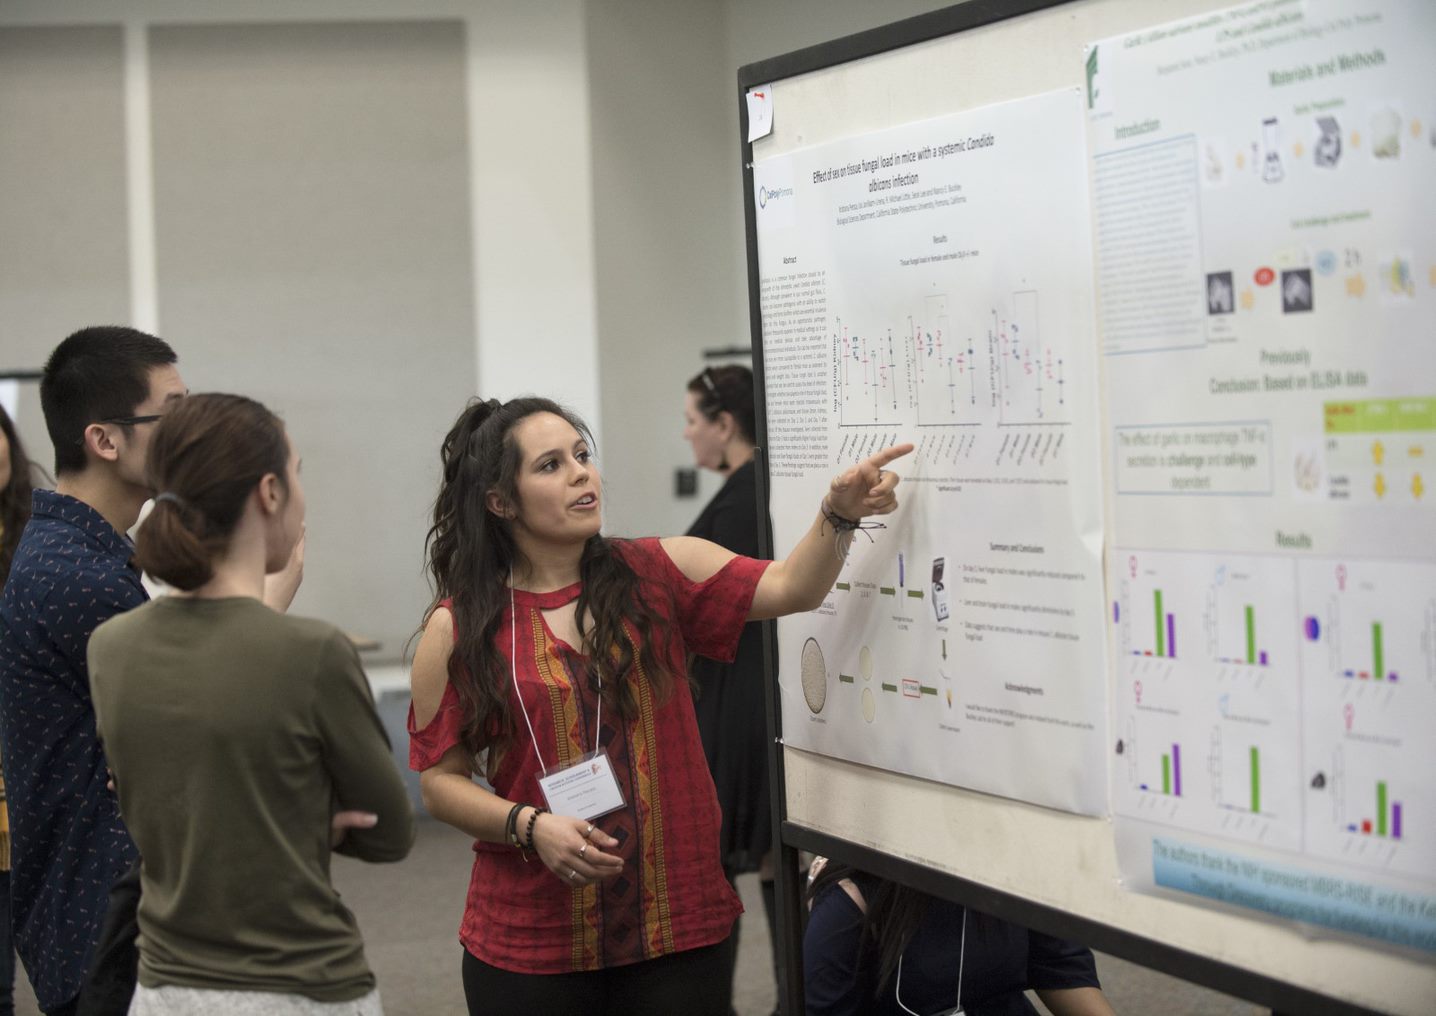 Two students standing in front of their poster presentation engaged in conversation with guests